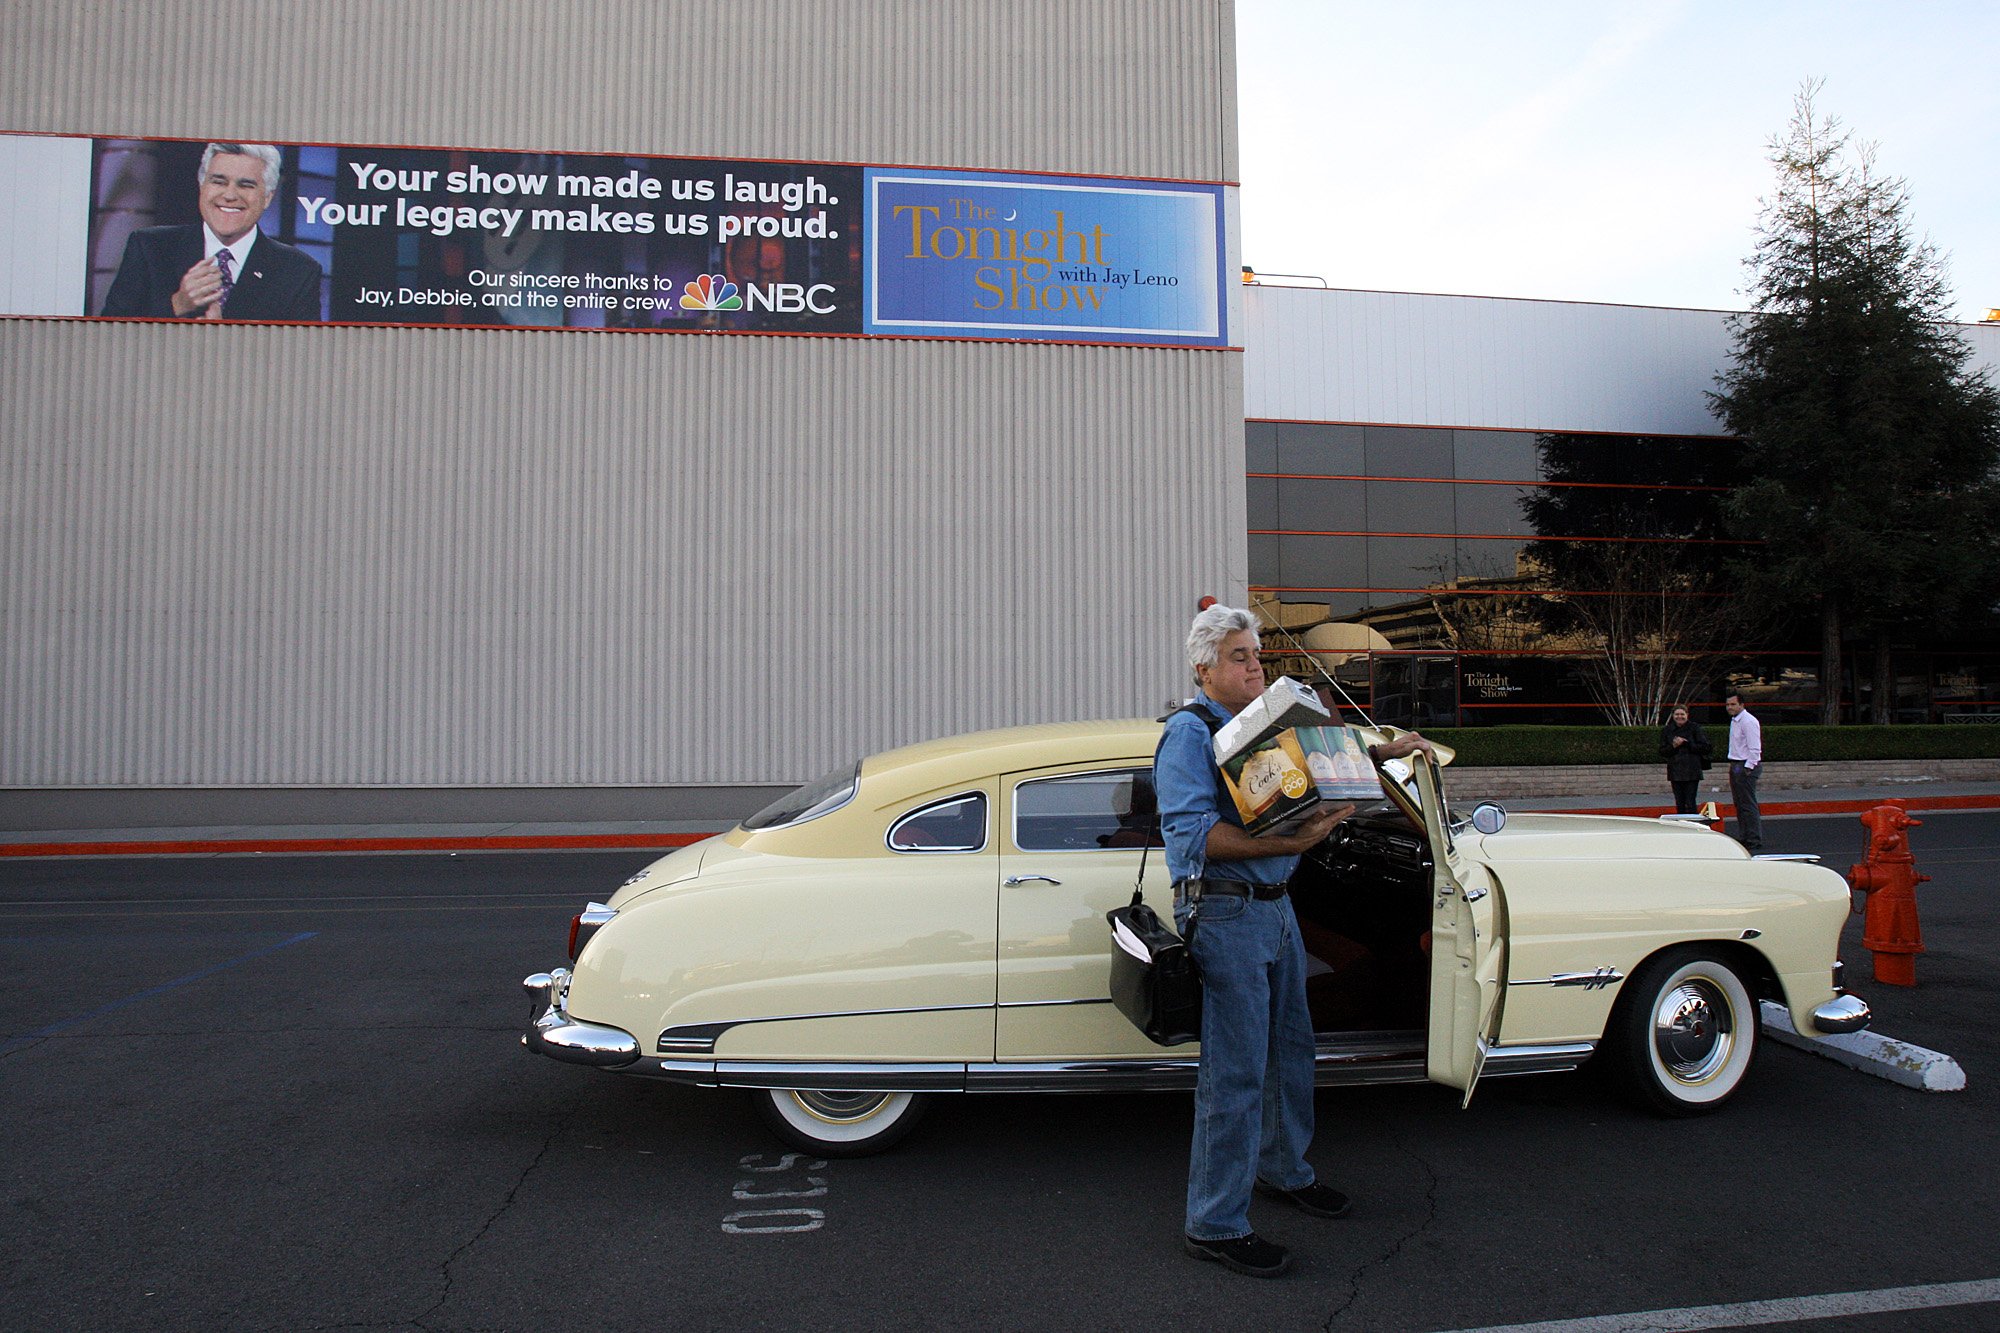 Jay Leno arrives at the "The Tonight Show" studios in Burbank in a Hudson Hornet on January 28, 2014 | Source: Getty Images